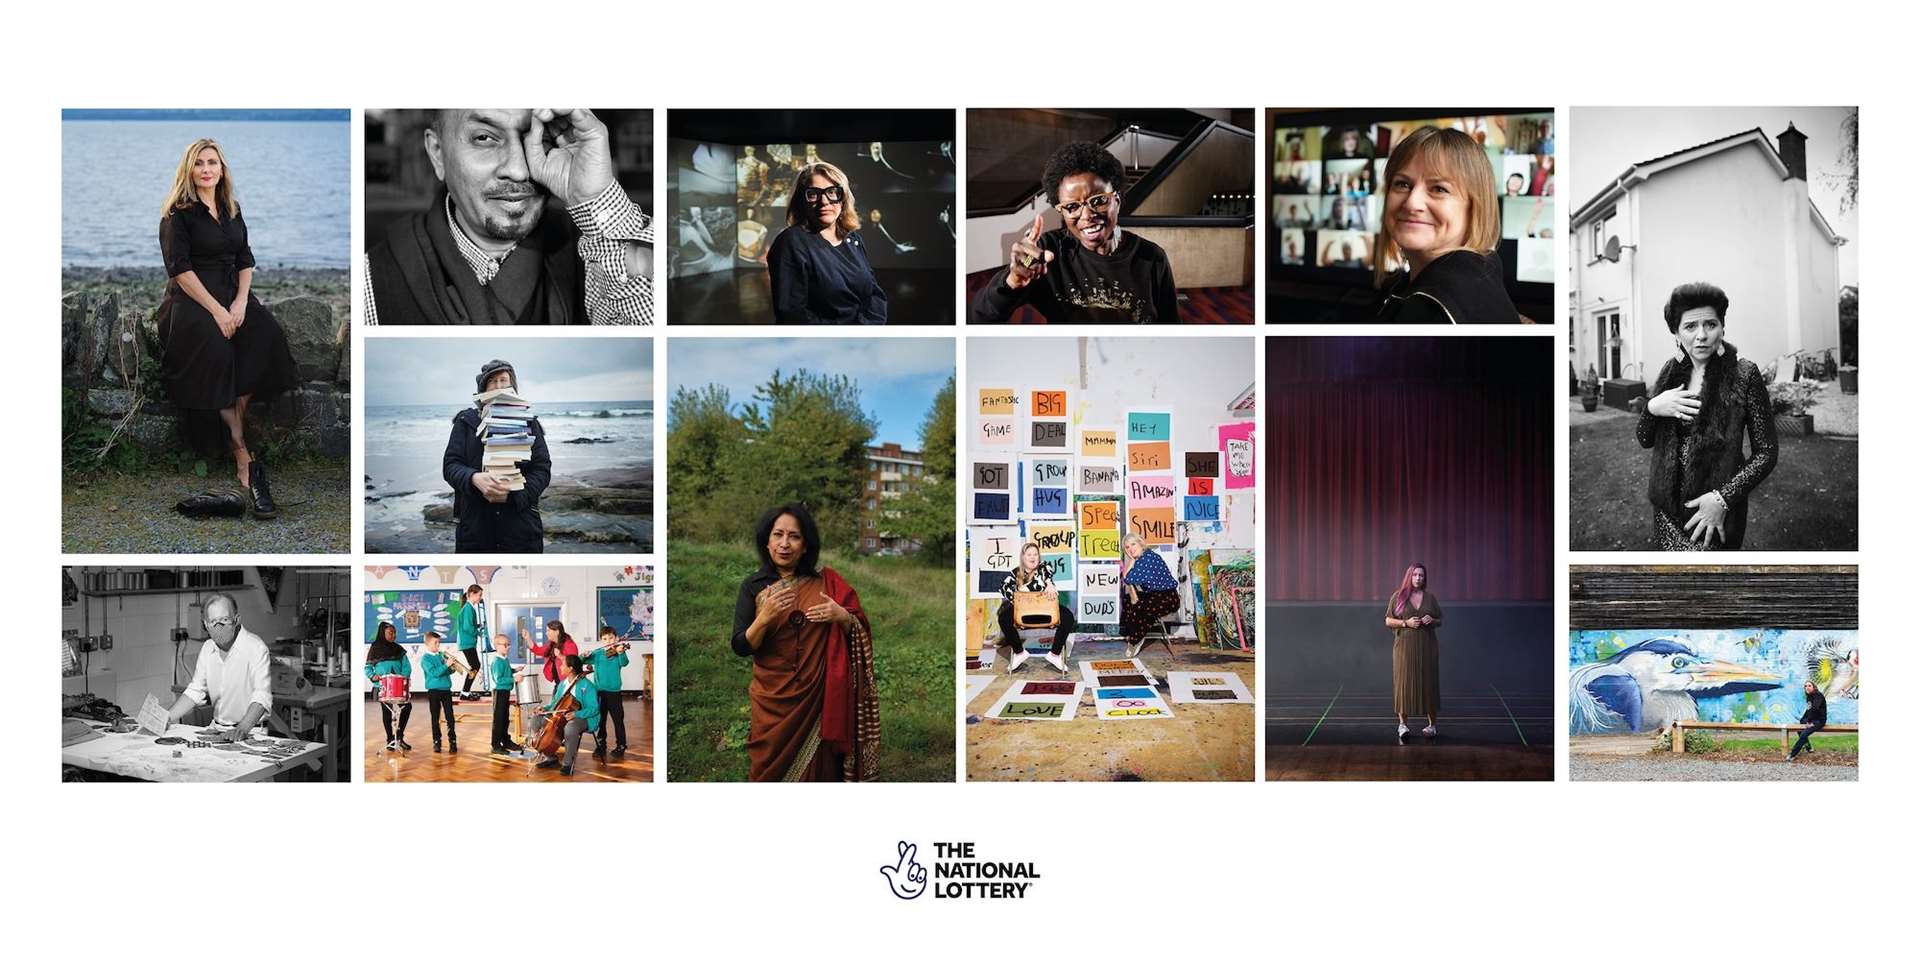 Images from the National Lottery’s 2020 Portraits of the People project.